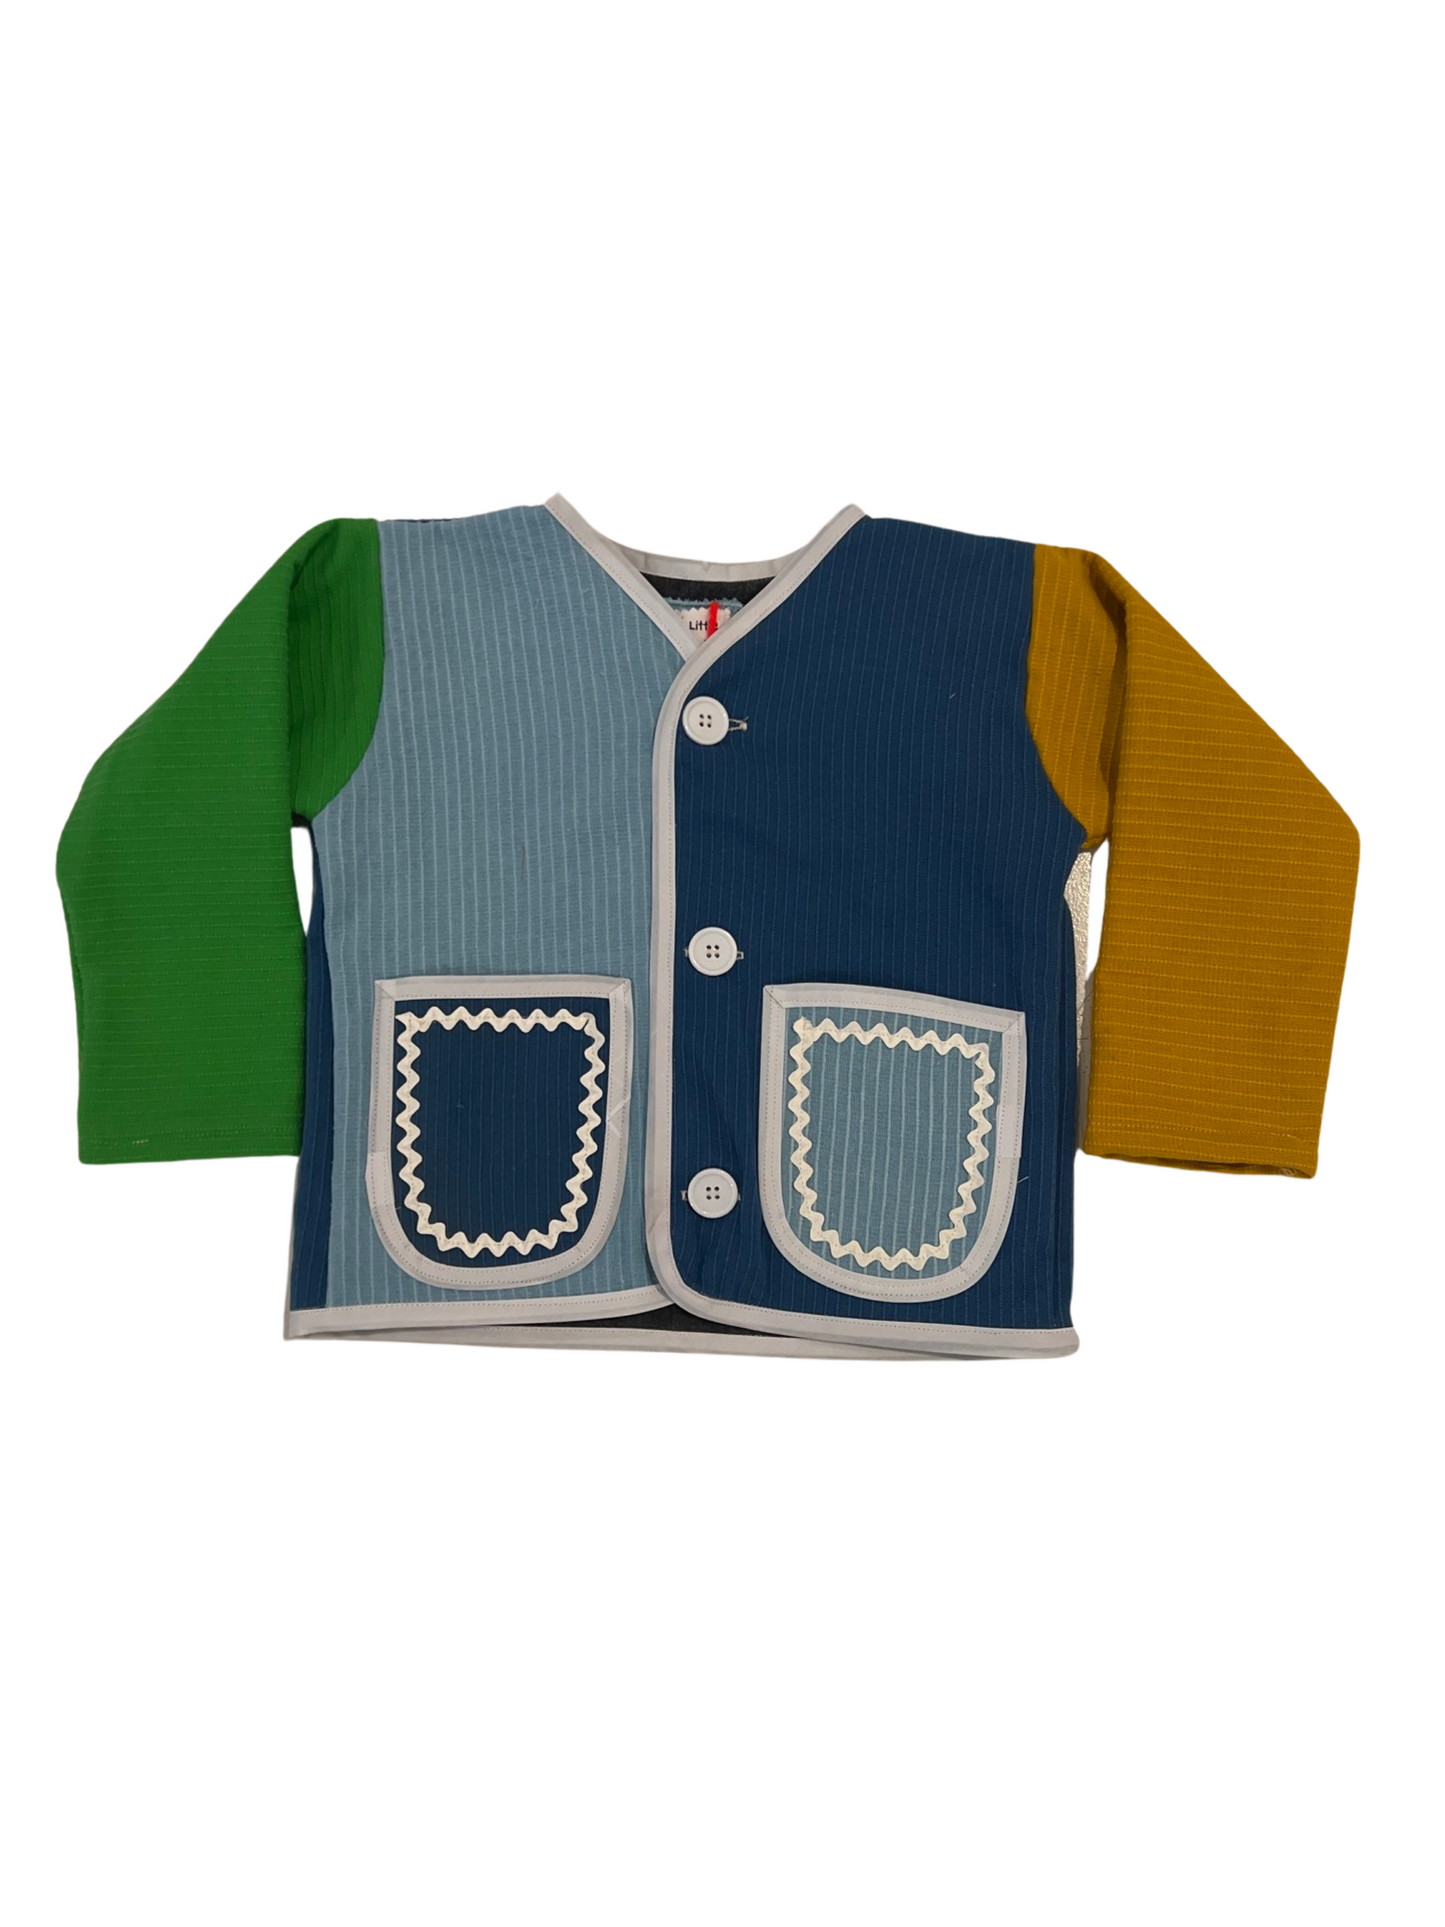 Little Lawless Quilted Jacket - SIZE 5Y